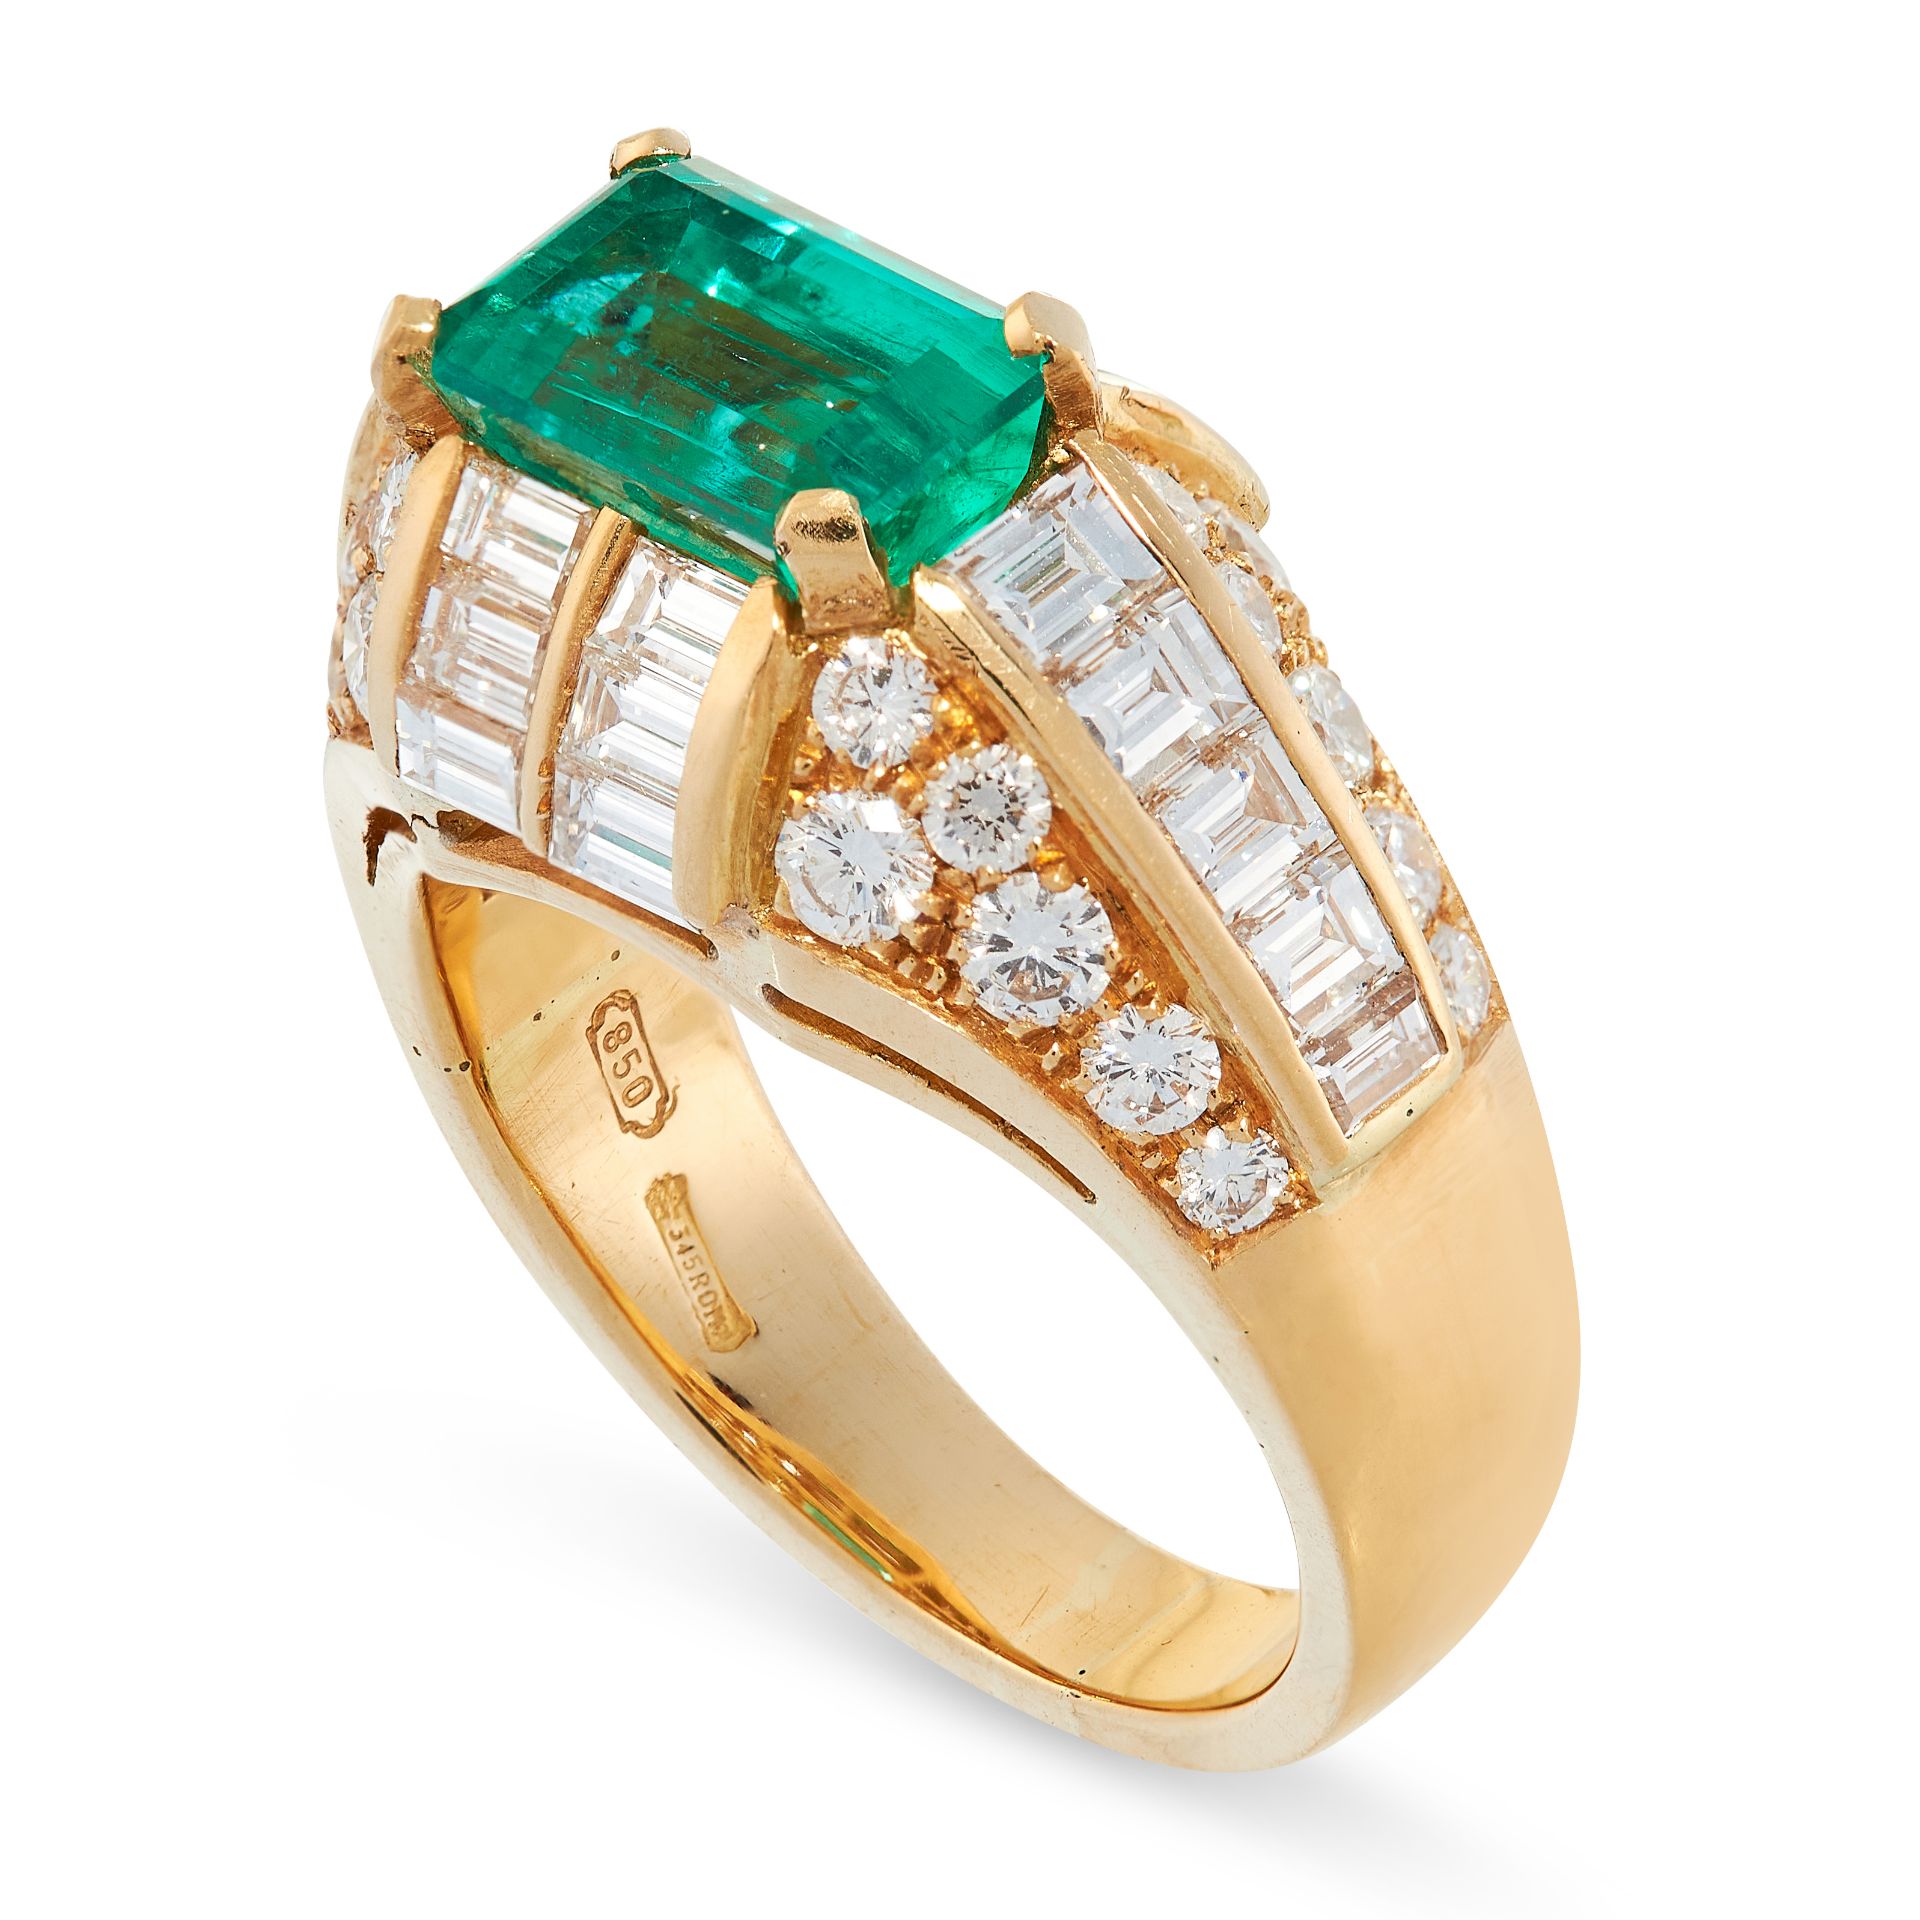 A COLOMBIAN EMERALD AND DIAMOND TROMBINO RING, BULGARI in 18ct yellow gold, set with an emerald - Image 2 of 3